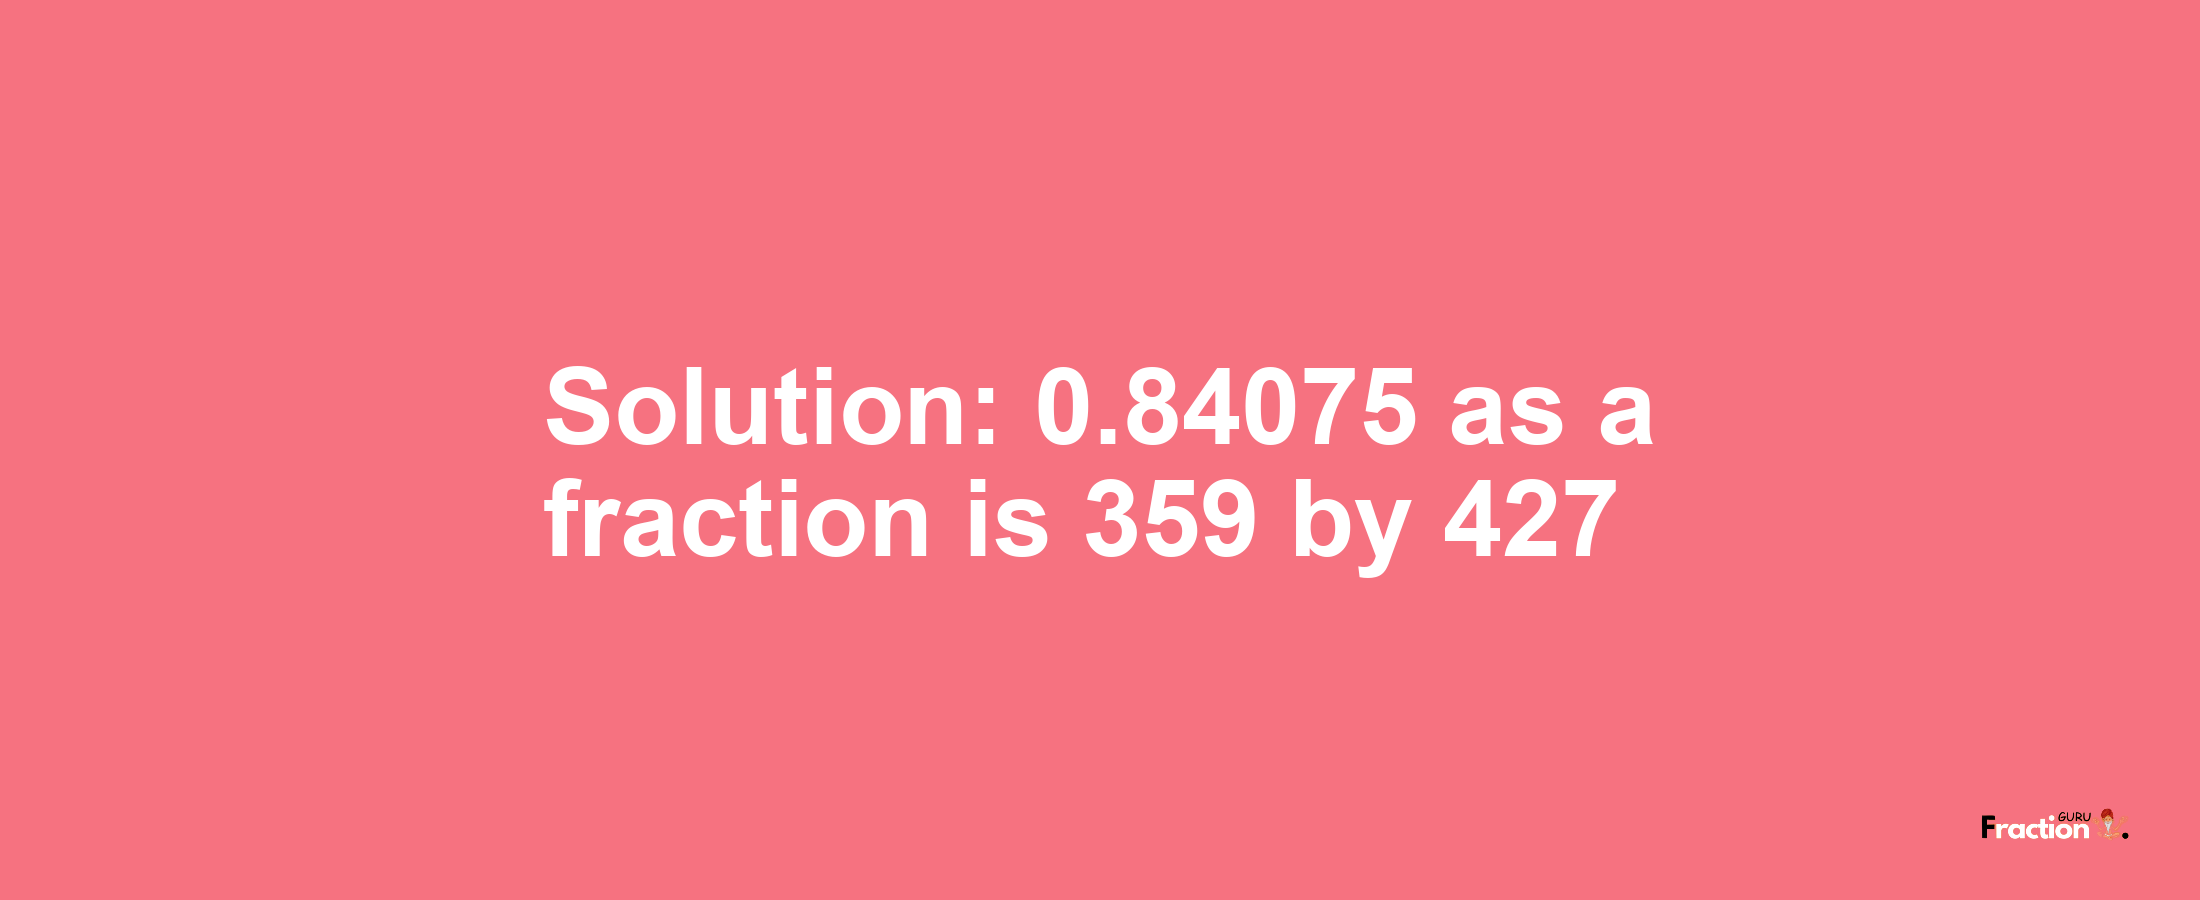 Solution:0.84075 as a fraction is 359/427